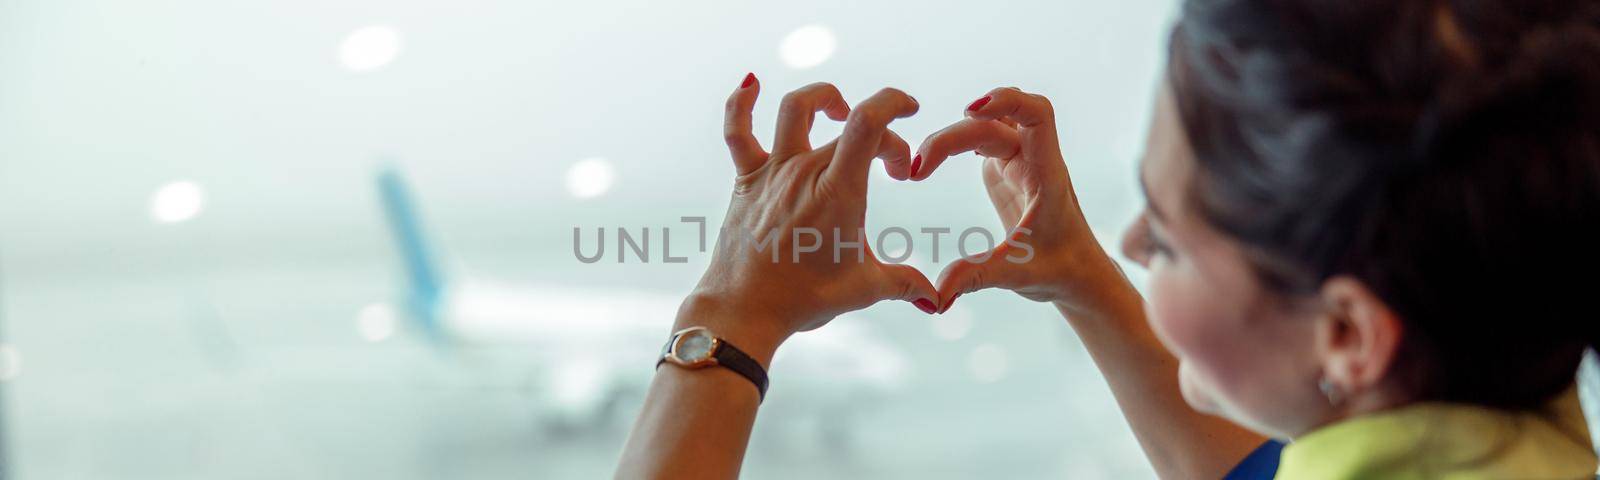 Close up of woman stewardess making heart sign with hands while looking out the window in airport terminal